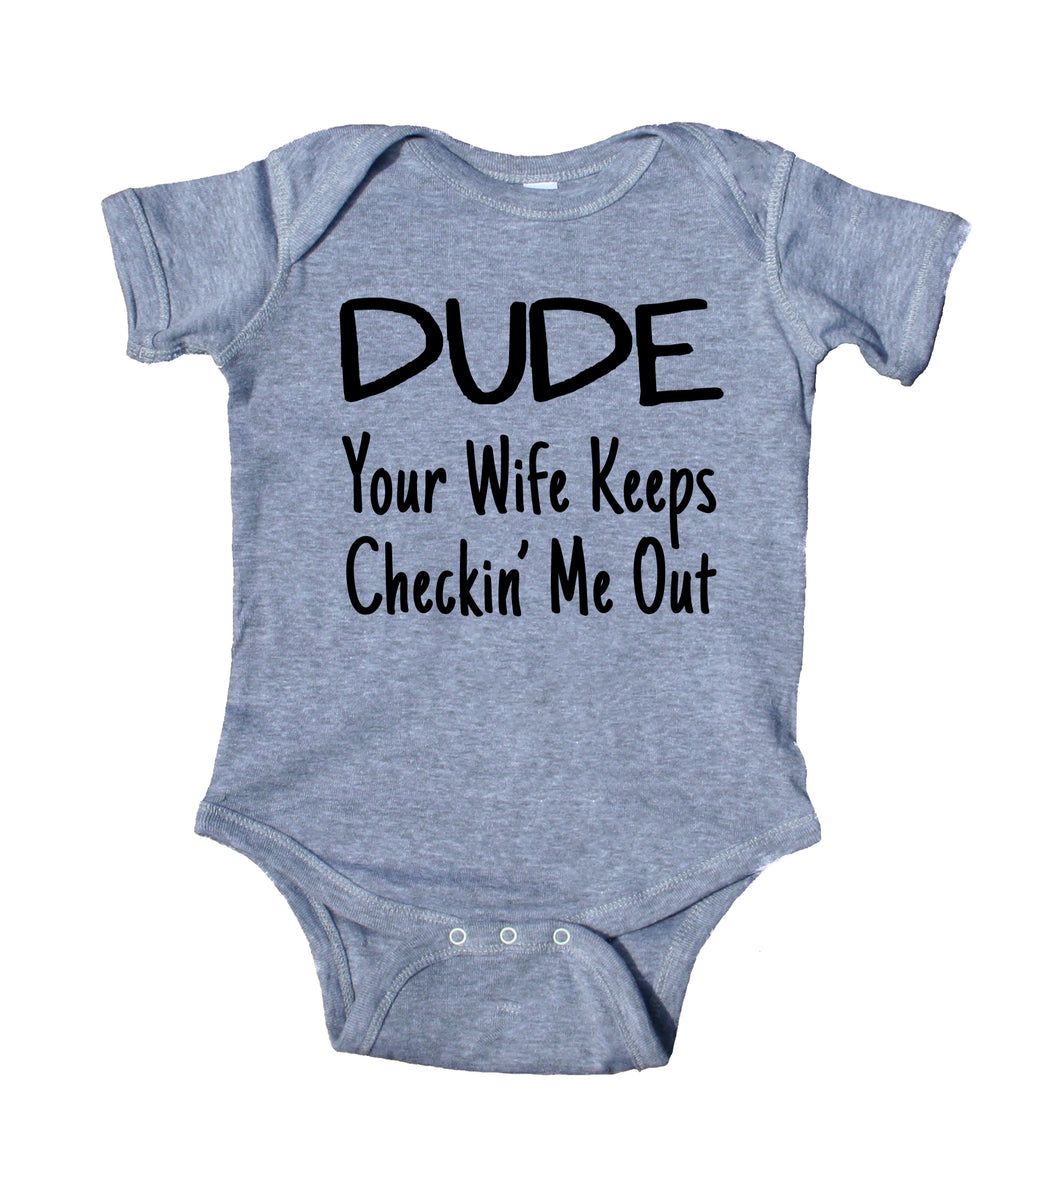 Dude Your Wife Keeps Checkin Me Out Baby Onesie Funny Boy Newborn Clot ...